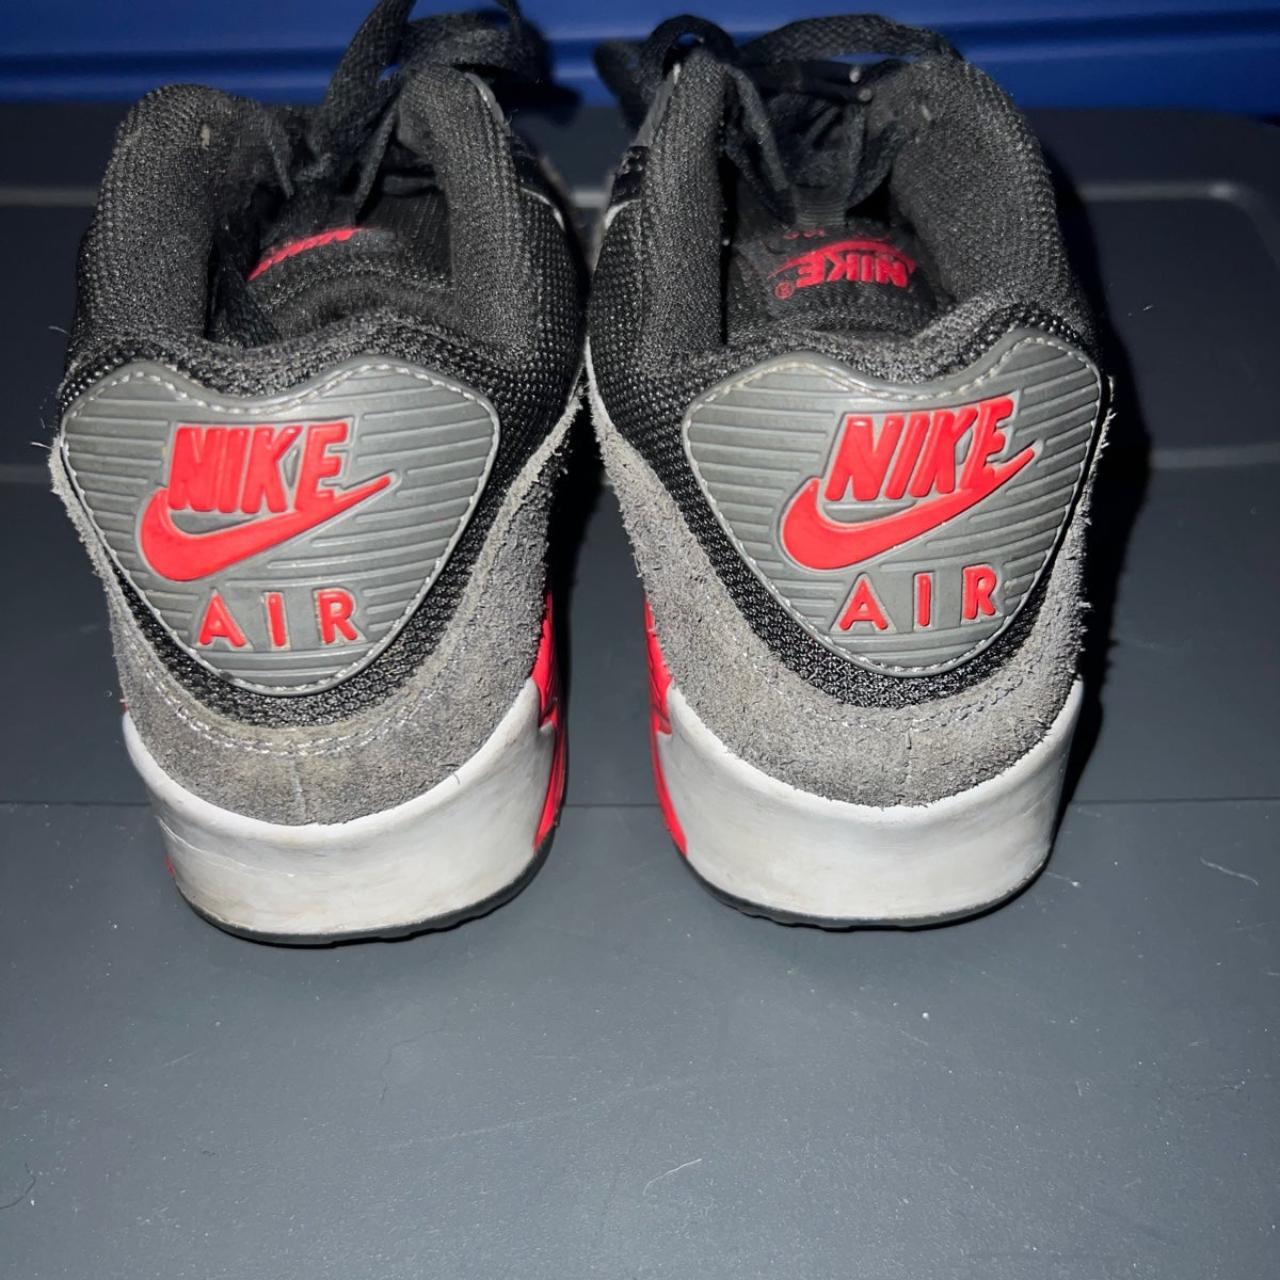 Nike Air Max 90 Bred Shoes Item is in good used... - Depop